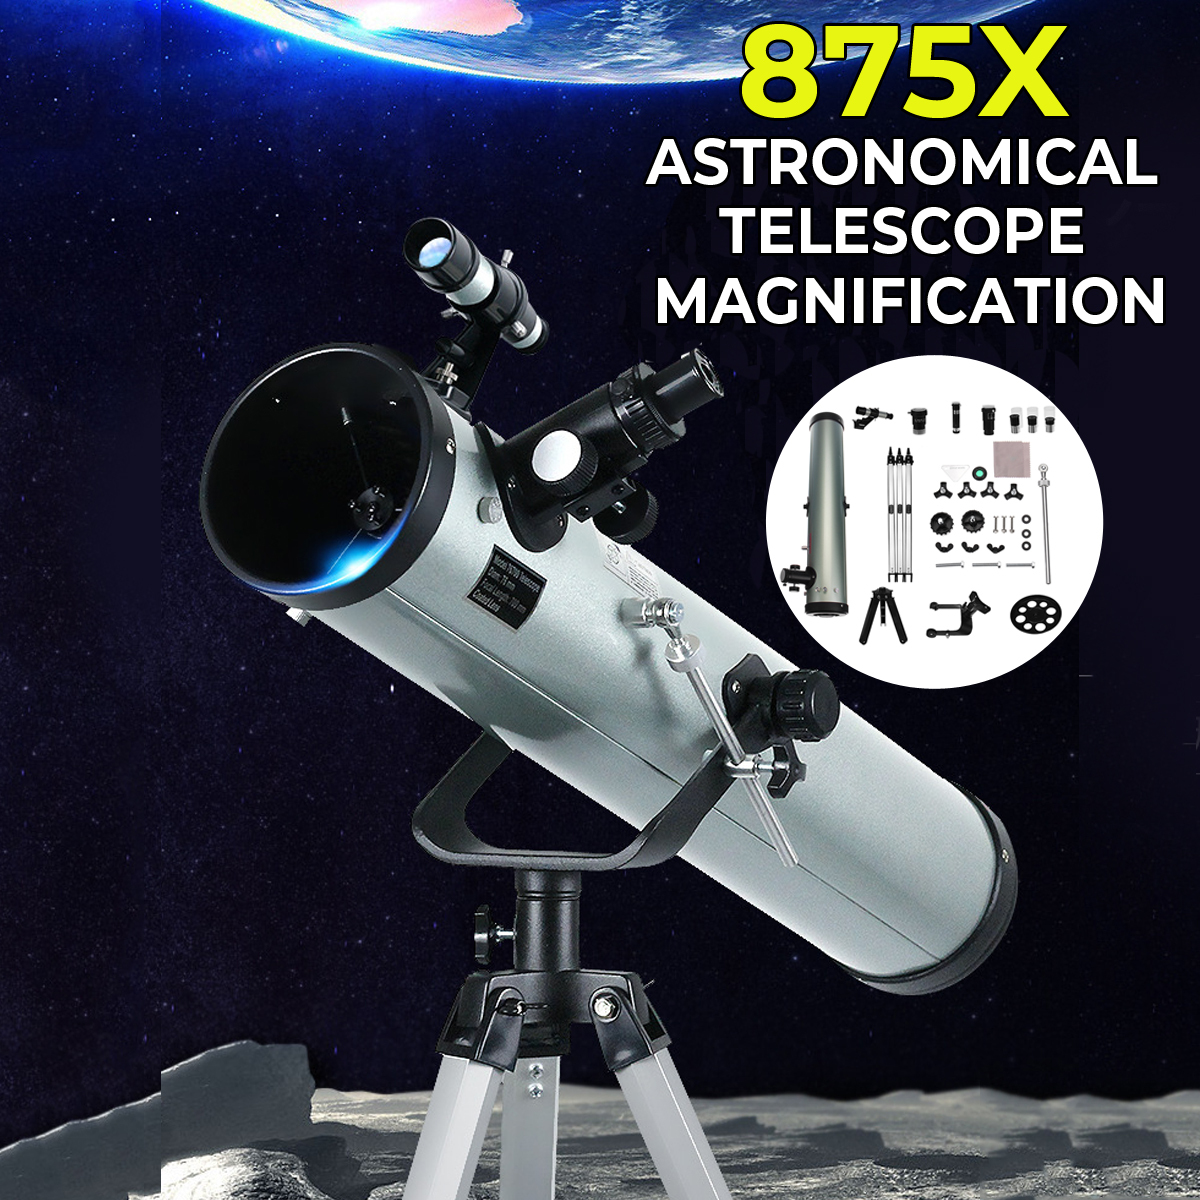 875X Astronomical Telescope with Viewfinder, Adjustable Tripod for Stargazing Monocular 700x76mm Professional Astronomical Refractor for Adults,Kids,Professional, Amateur